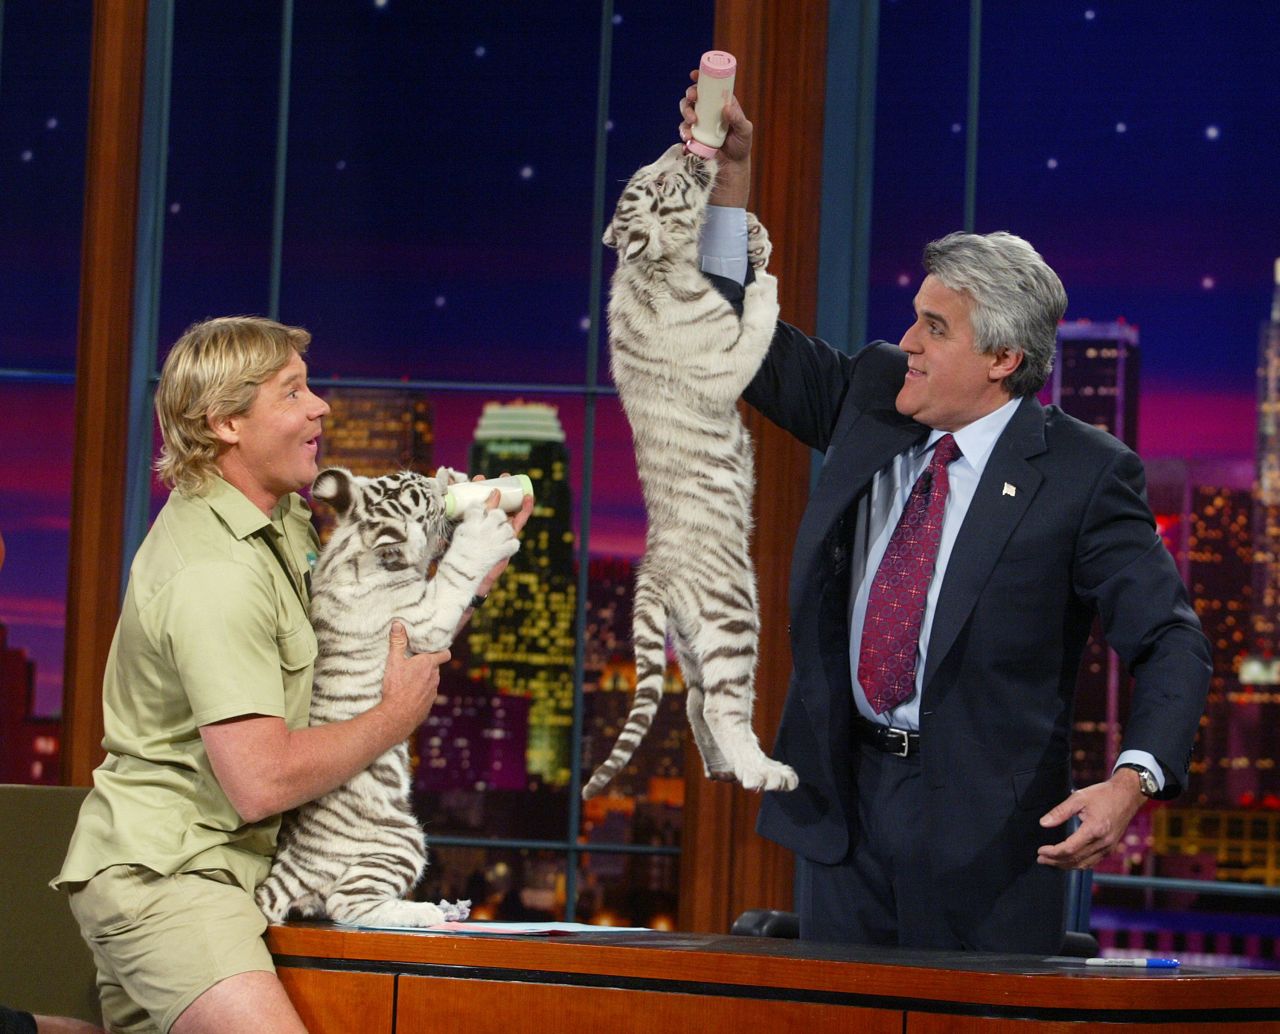 The late Steve Irwin (left), also known as the "Crocodile Hunter," appears with white tiger cubs on "The Tonight Show with Jay Leno" at the NBC studios on February 4, 2003 in Burbank, California. 